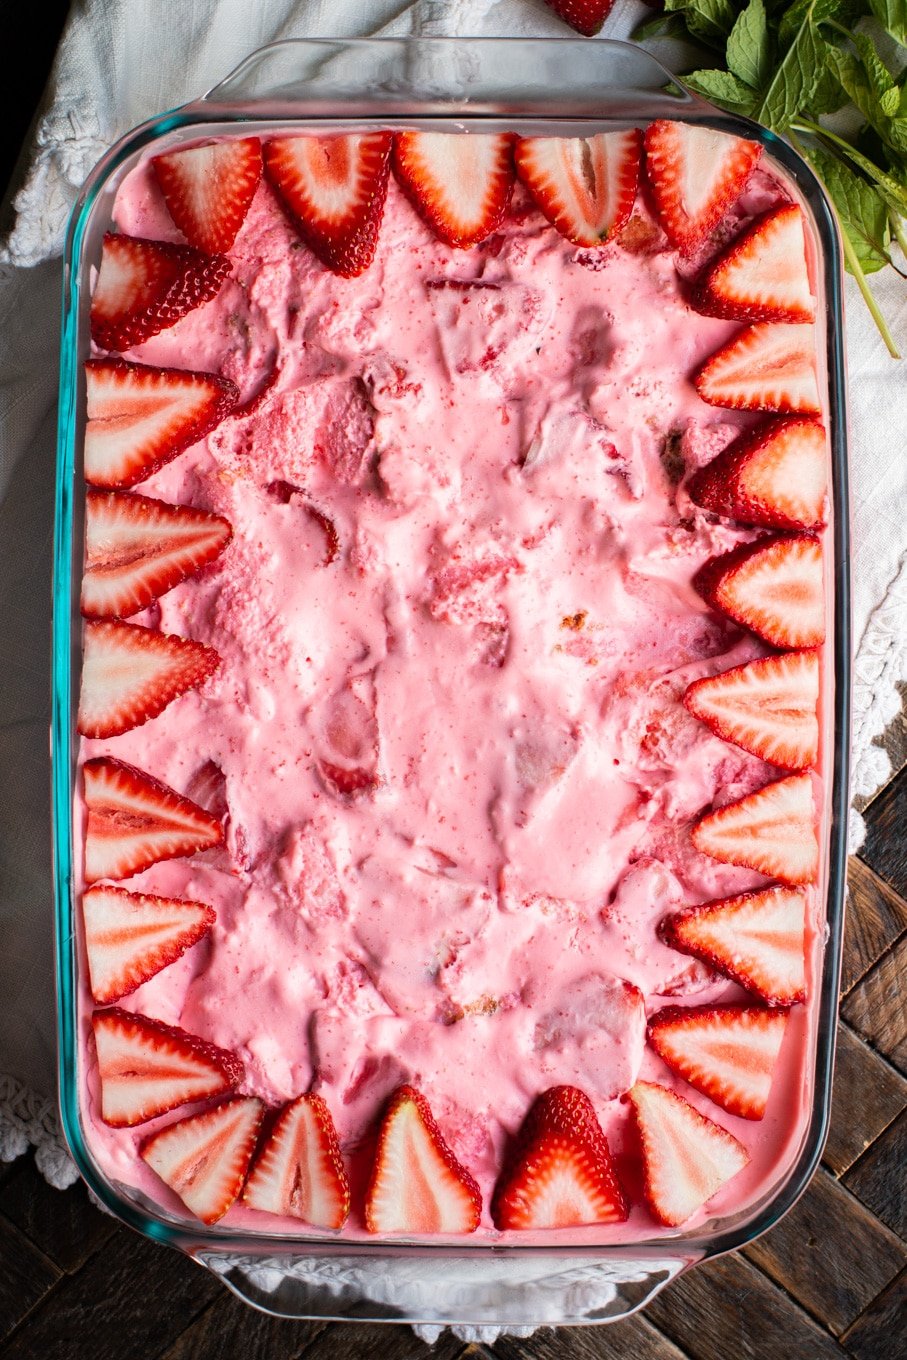 strawberry angel food dessert with fresh strawberries on top.